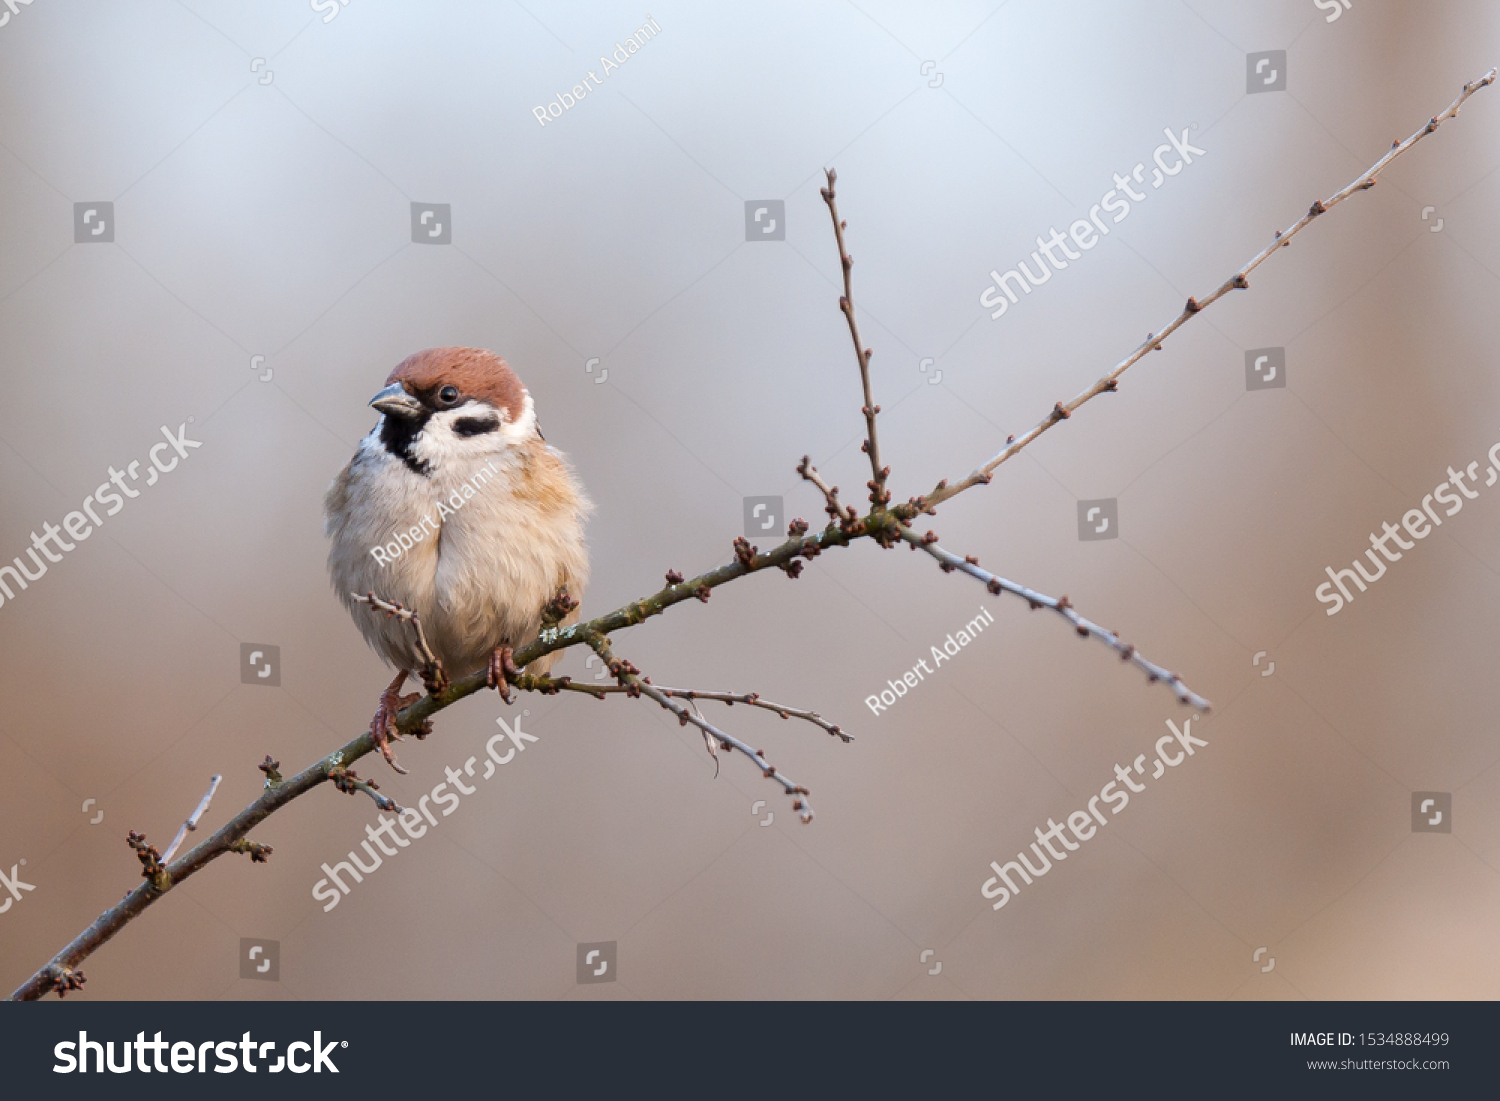 Tree Sparrow Passer montanus sitting on a twig at dusk. Sparrows are among the most familiar of all wild birds. They are primarily seed-eaters, though they also consume small insects. #1534888499